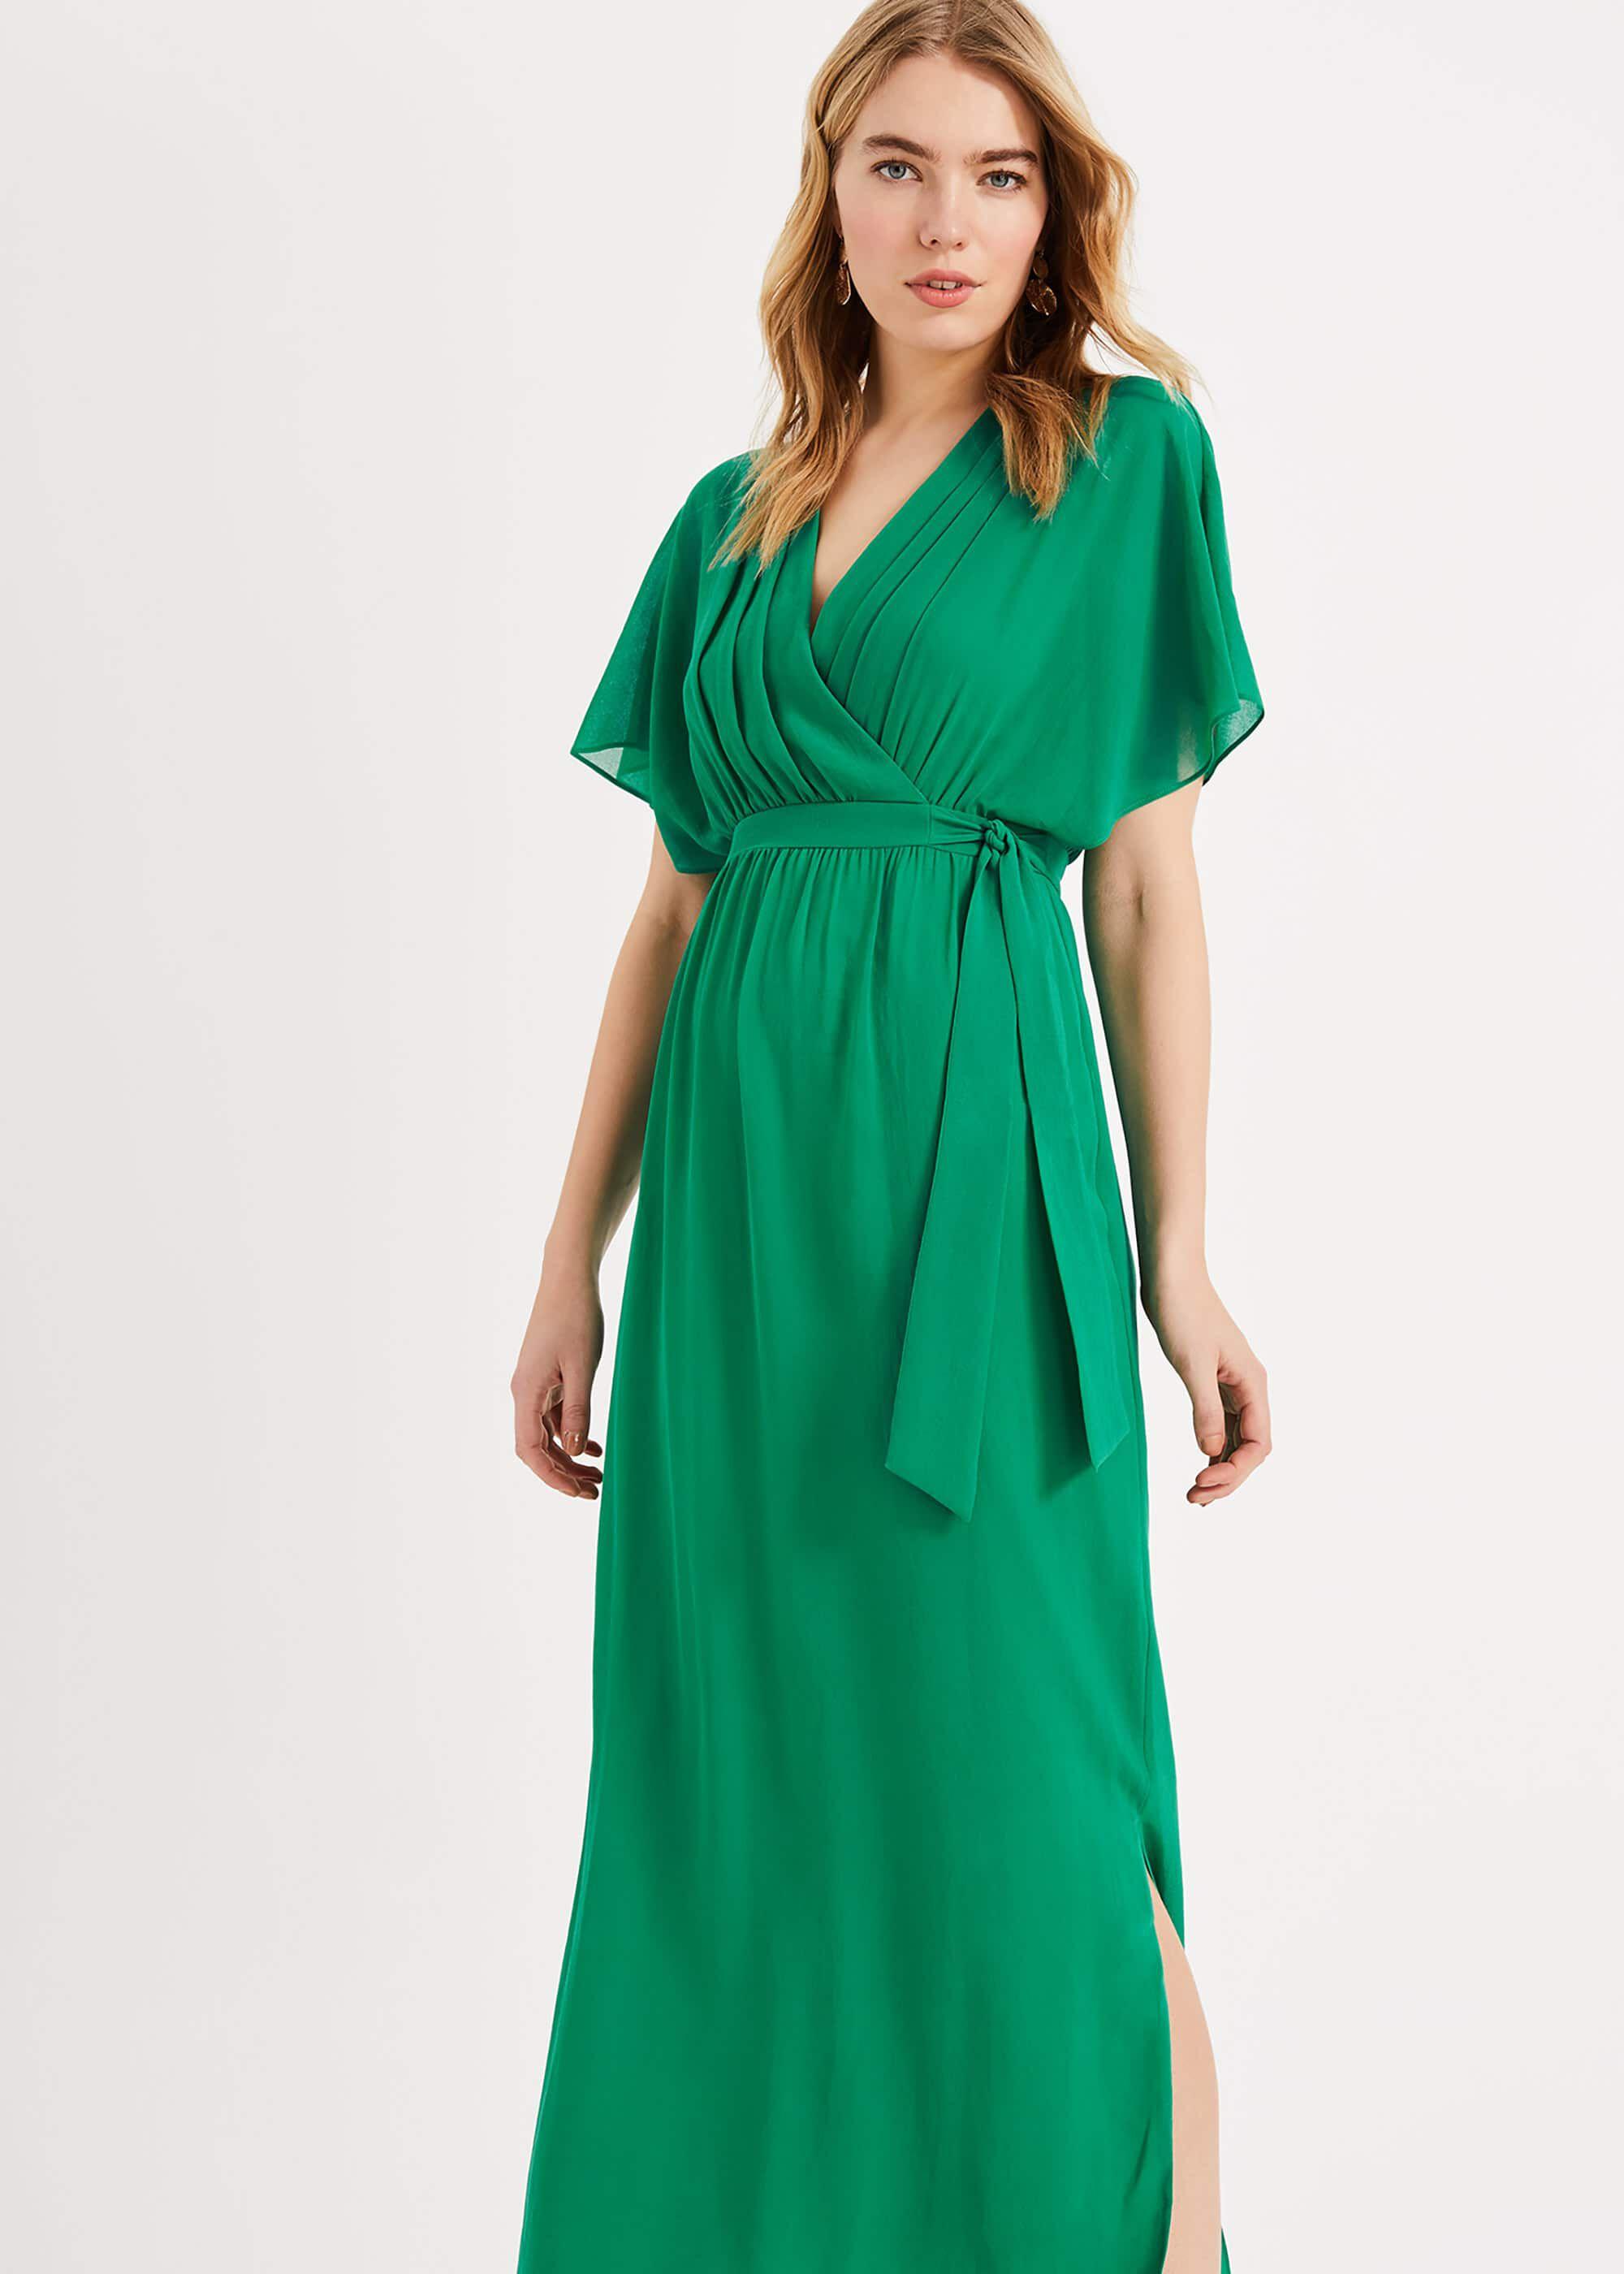 Phase Eight Chiffon Dress Flash Sales, UP TO 50% OFF | www.loop-cn.com